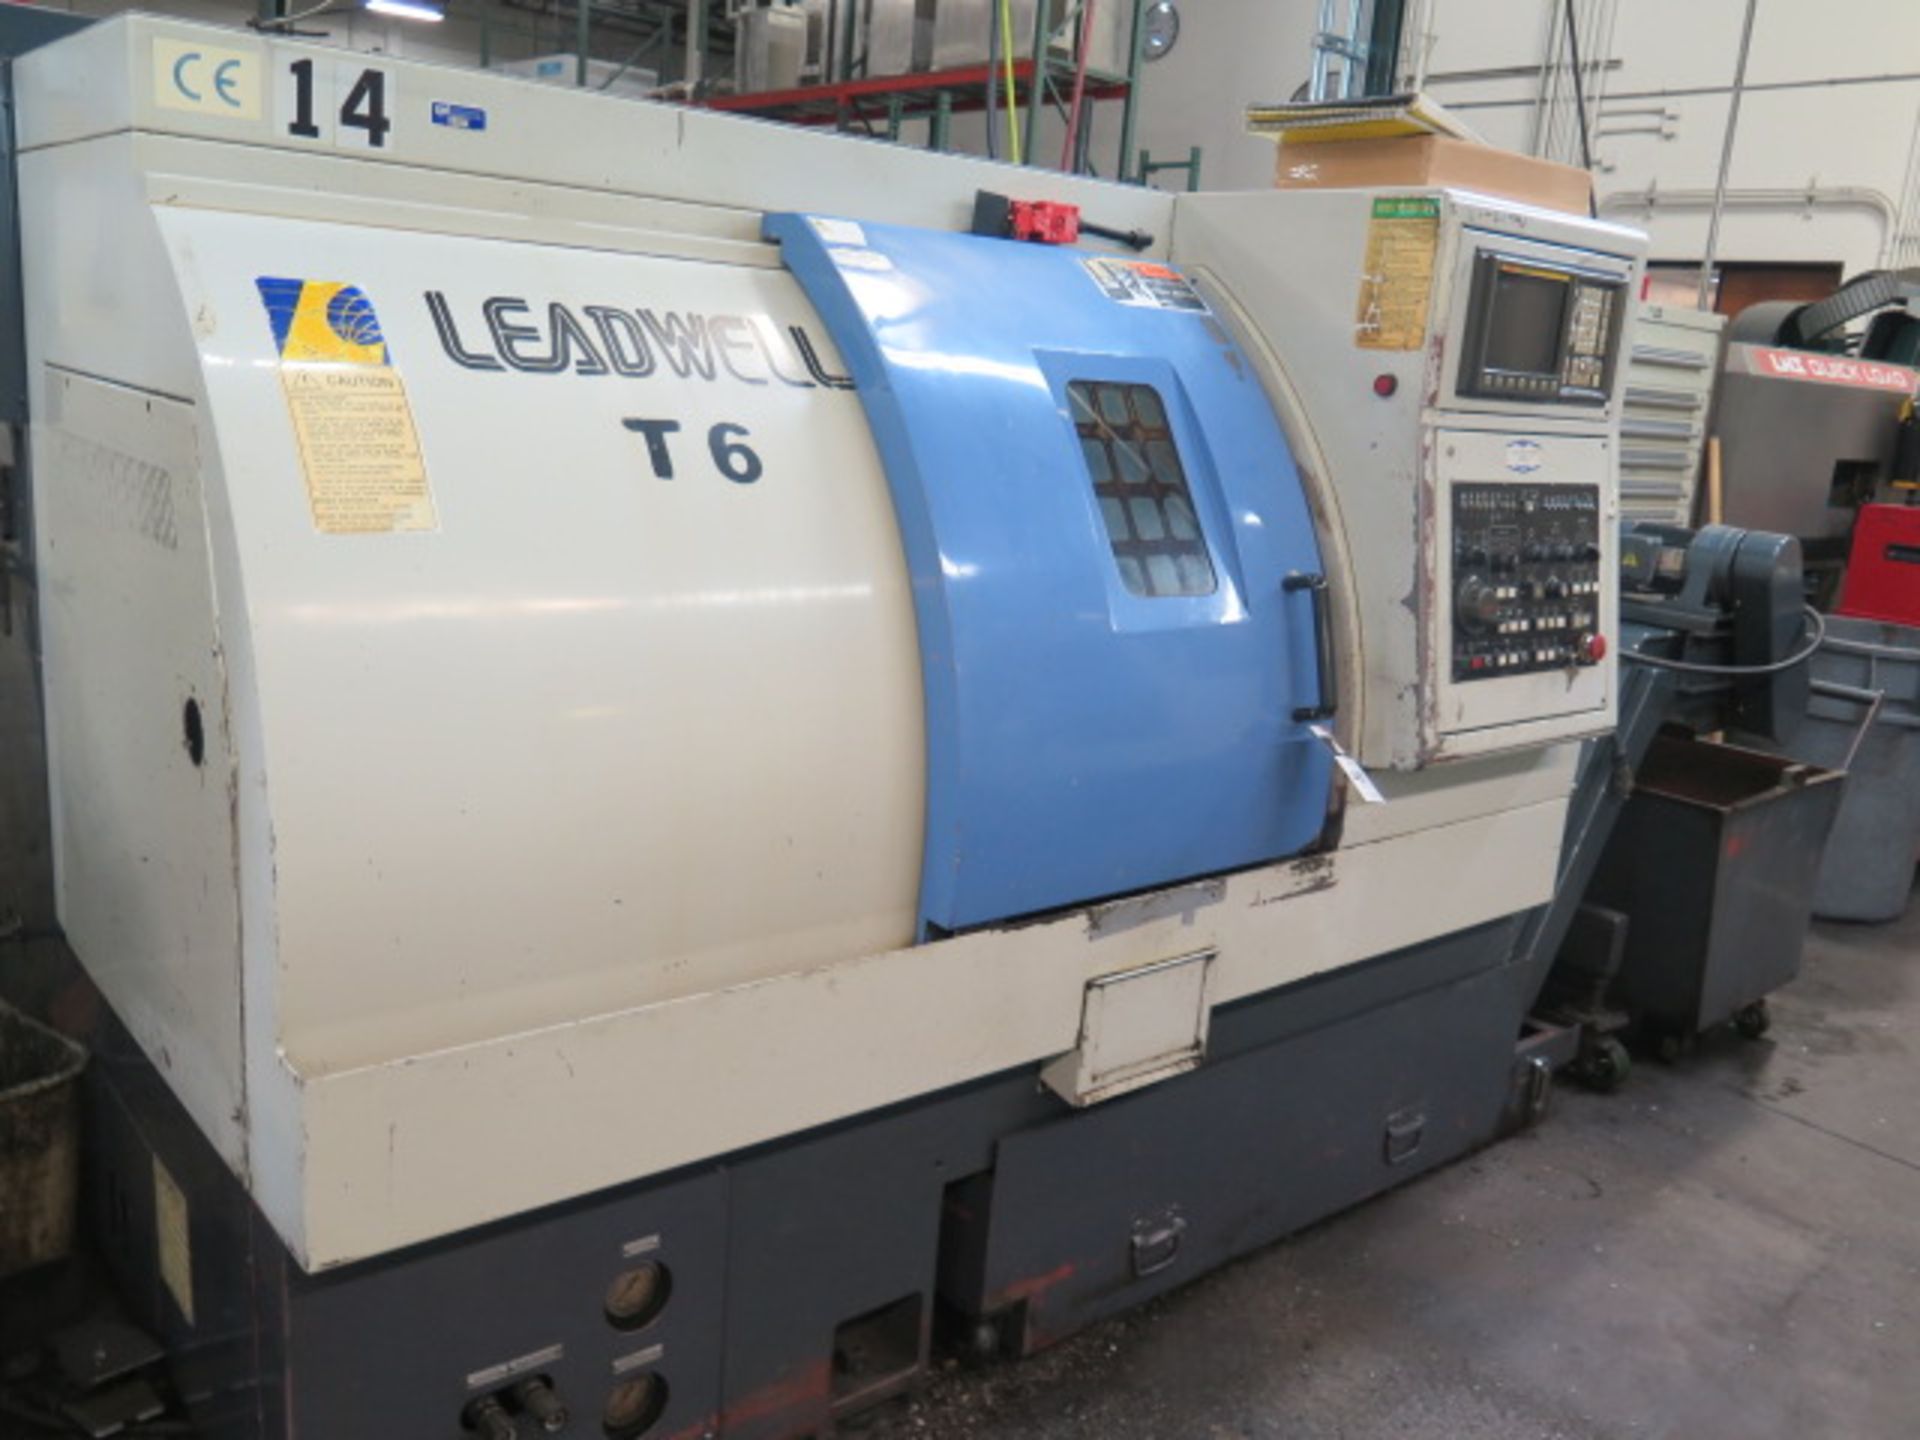 Leadwell T6 CNC Turning Center s/n L2TJJ0823 w/Fanuc Series 0-T Controls, Tool Presetter, SOLD AS IS - Image 2 of 12